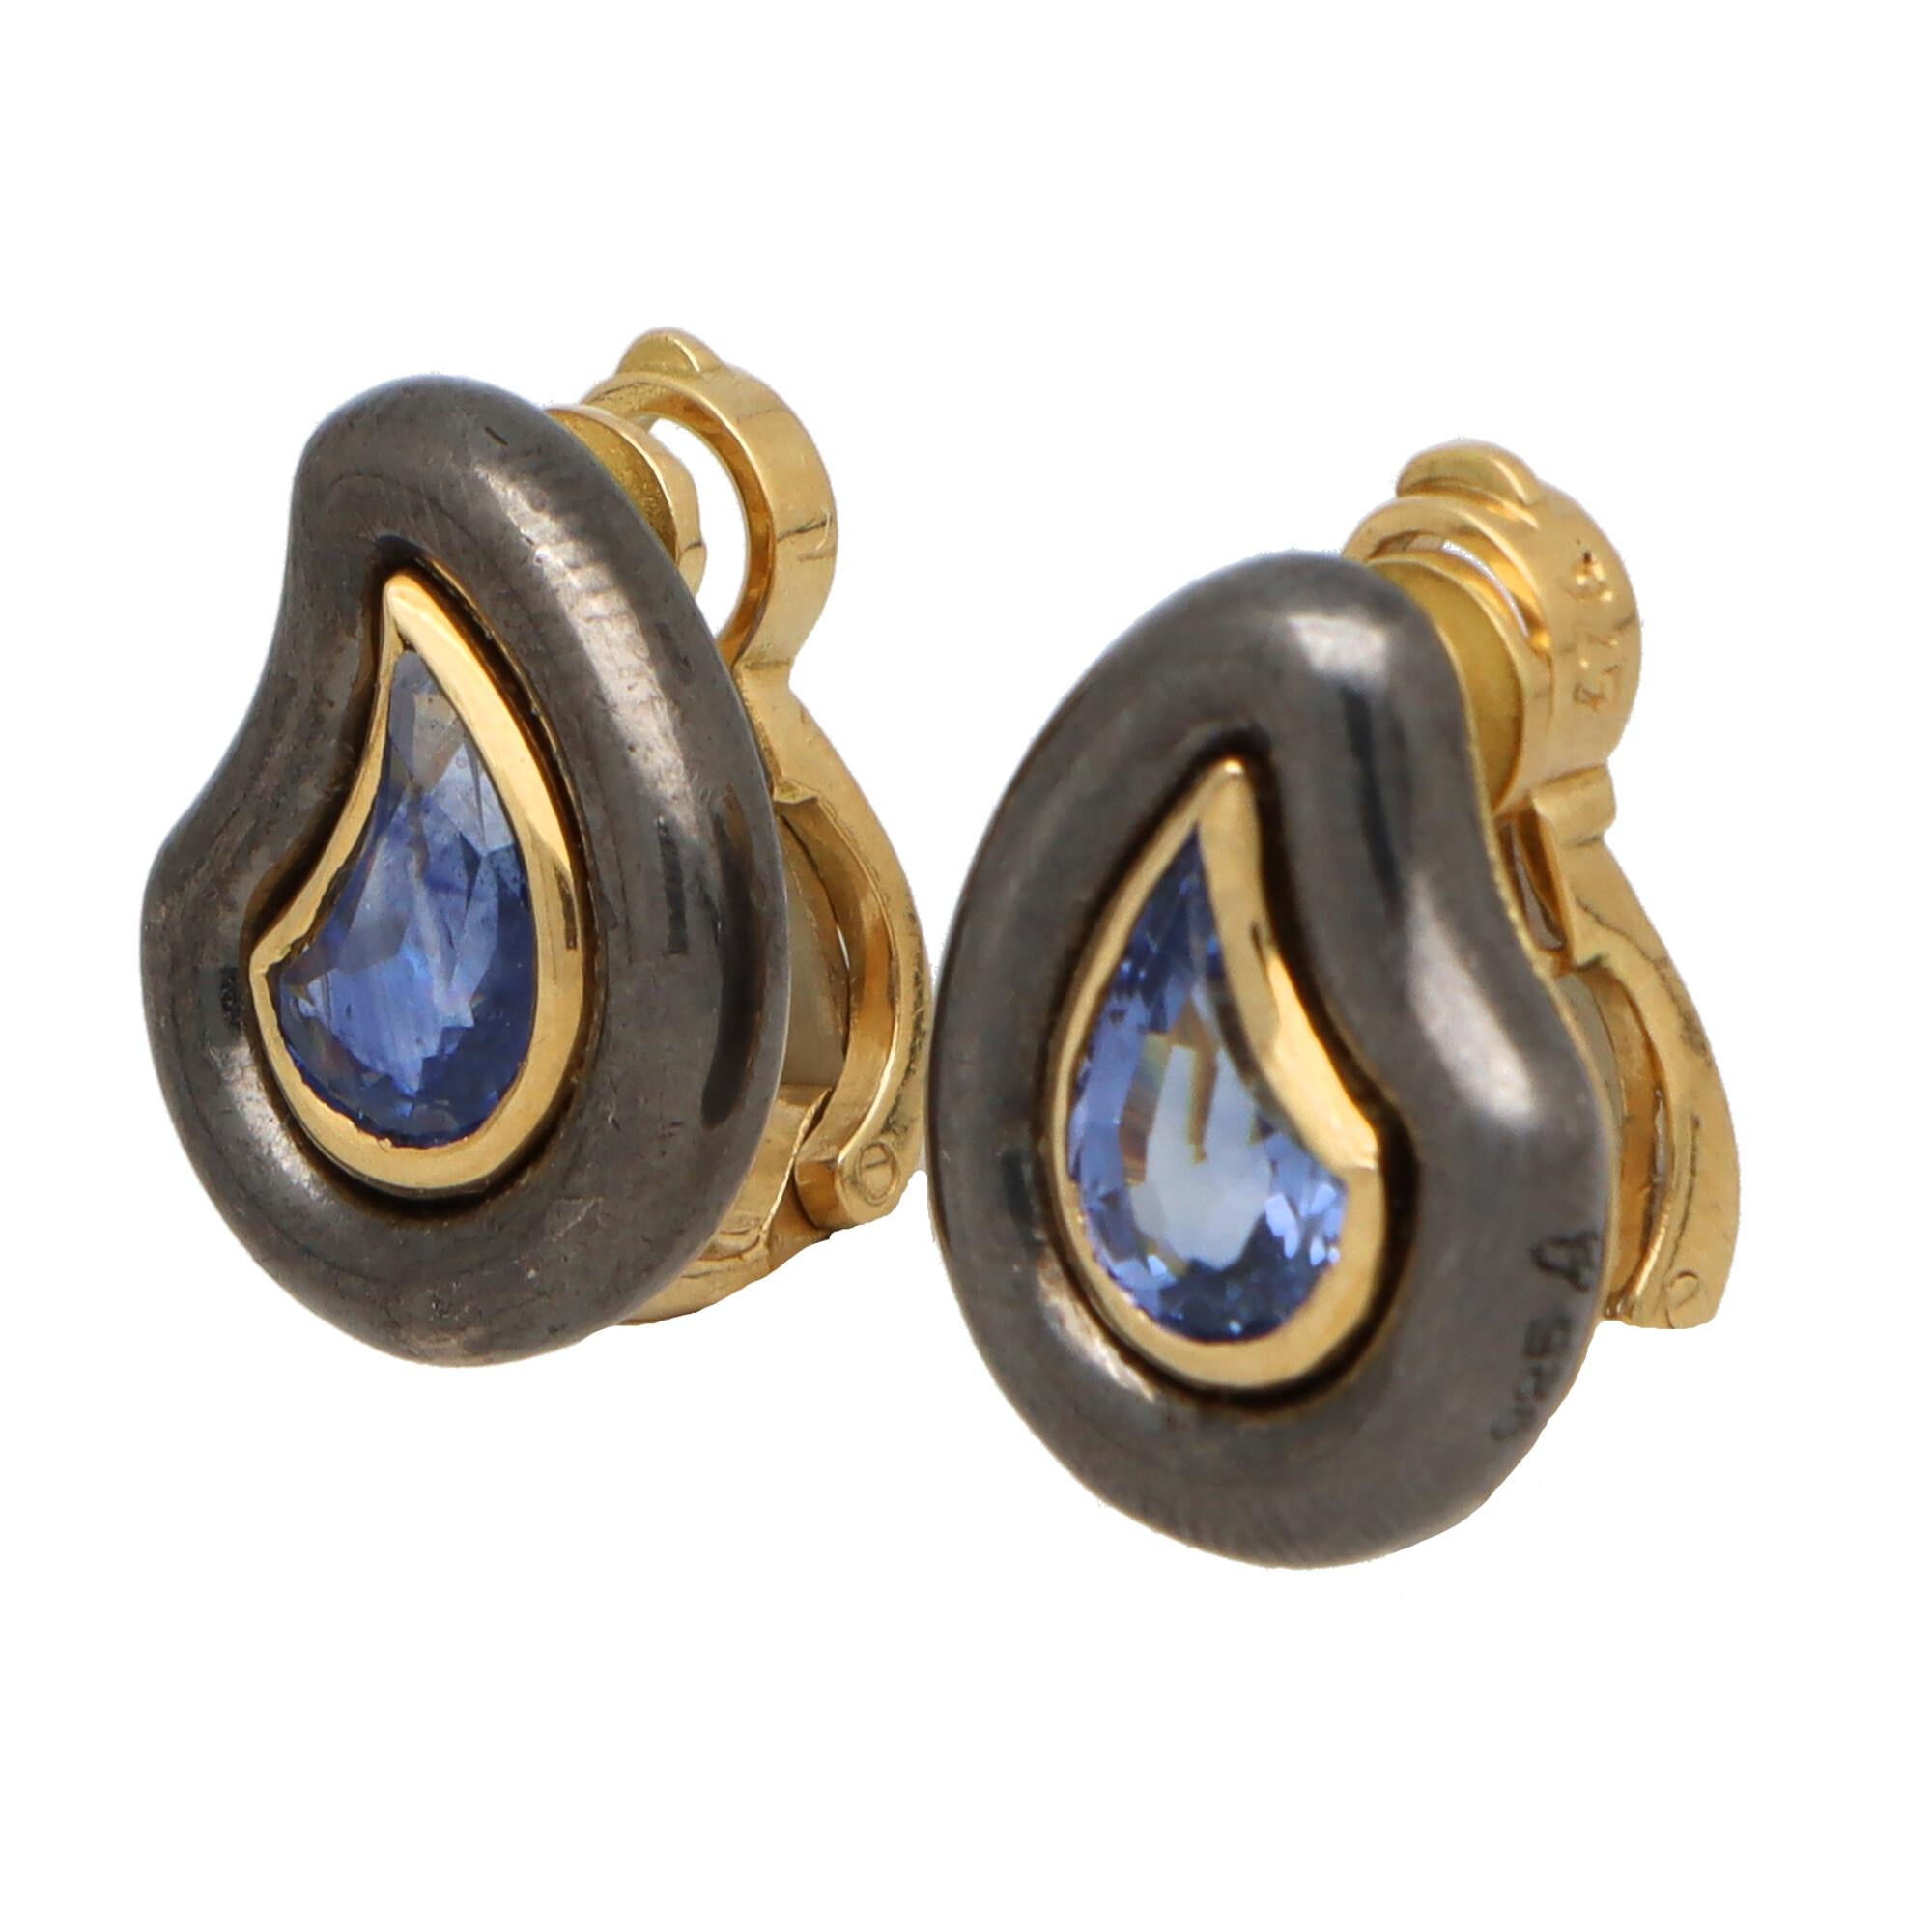 A unique vintage pair of Poiray blue sapphire earrings set in 18k yellow and silver.  

Each earring is predominantly set with a fancy teardrop shape blue sapphire. The sapphires are then rubover set in a yellow gold setting and surrounded by a